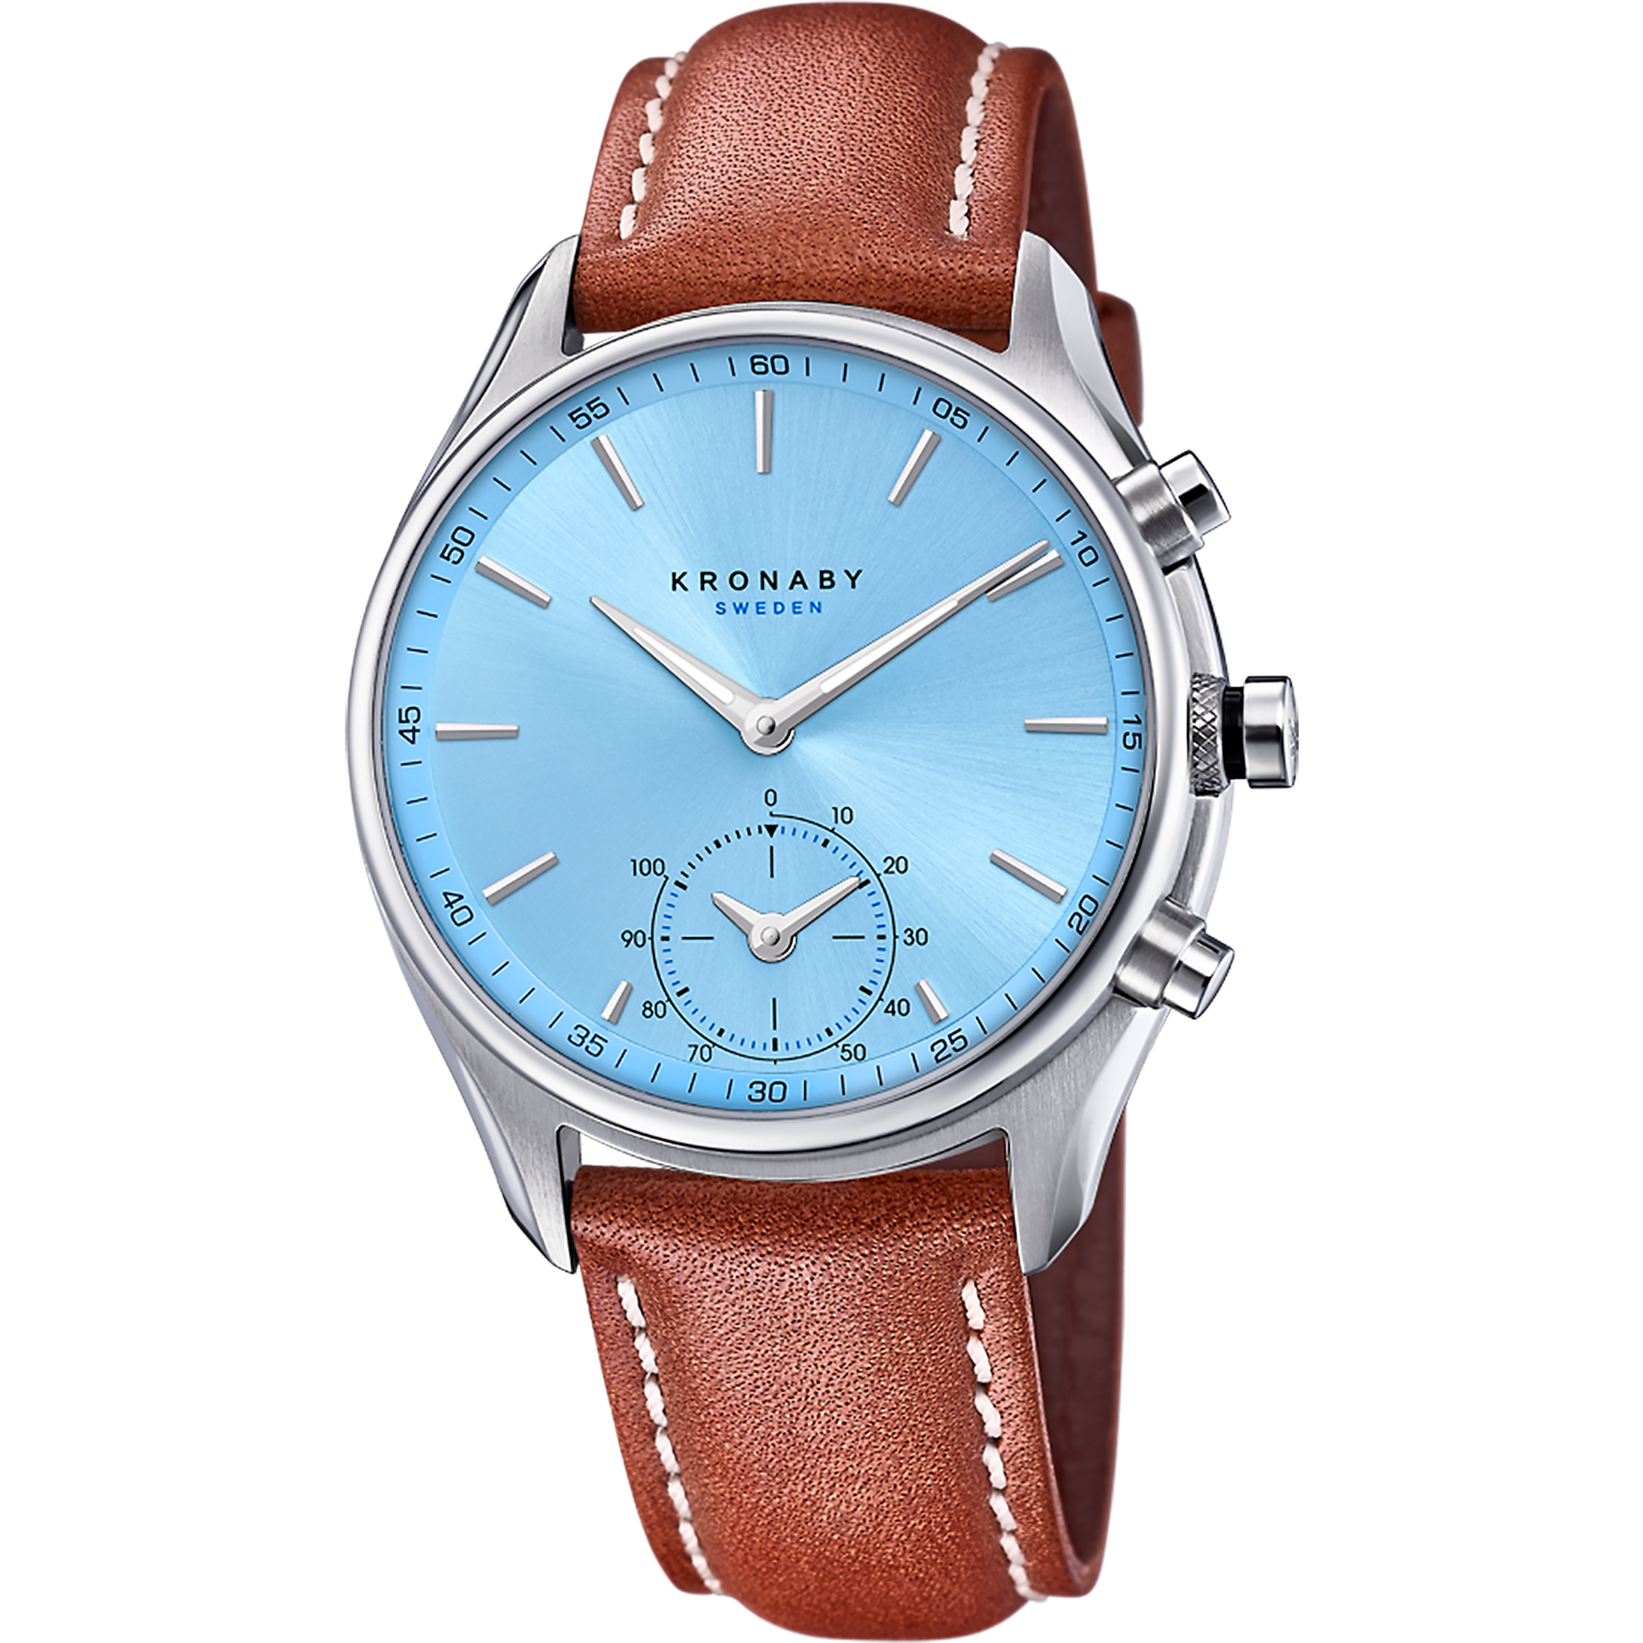 Kronaby Sekel S3781-3 - Leather - Strap Color: Brown - Strap Size: 22 mm - Case Size: 43 mm